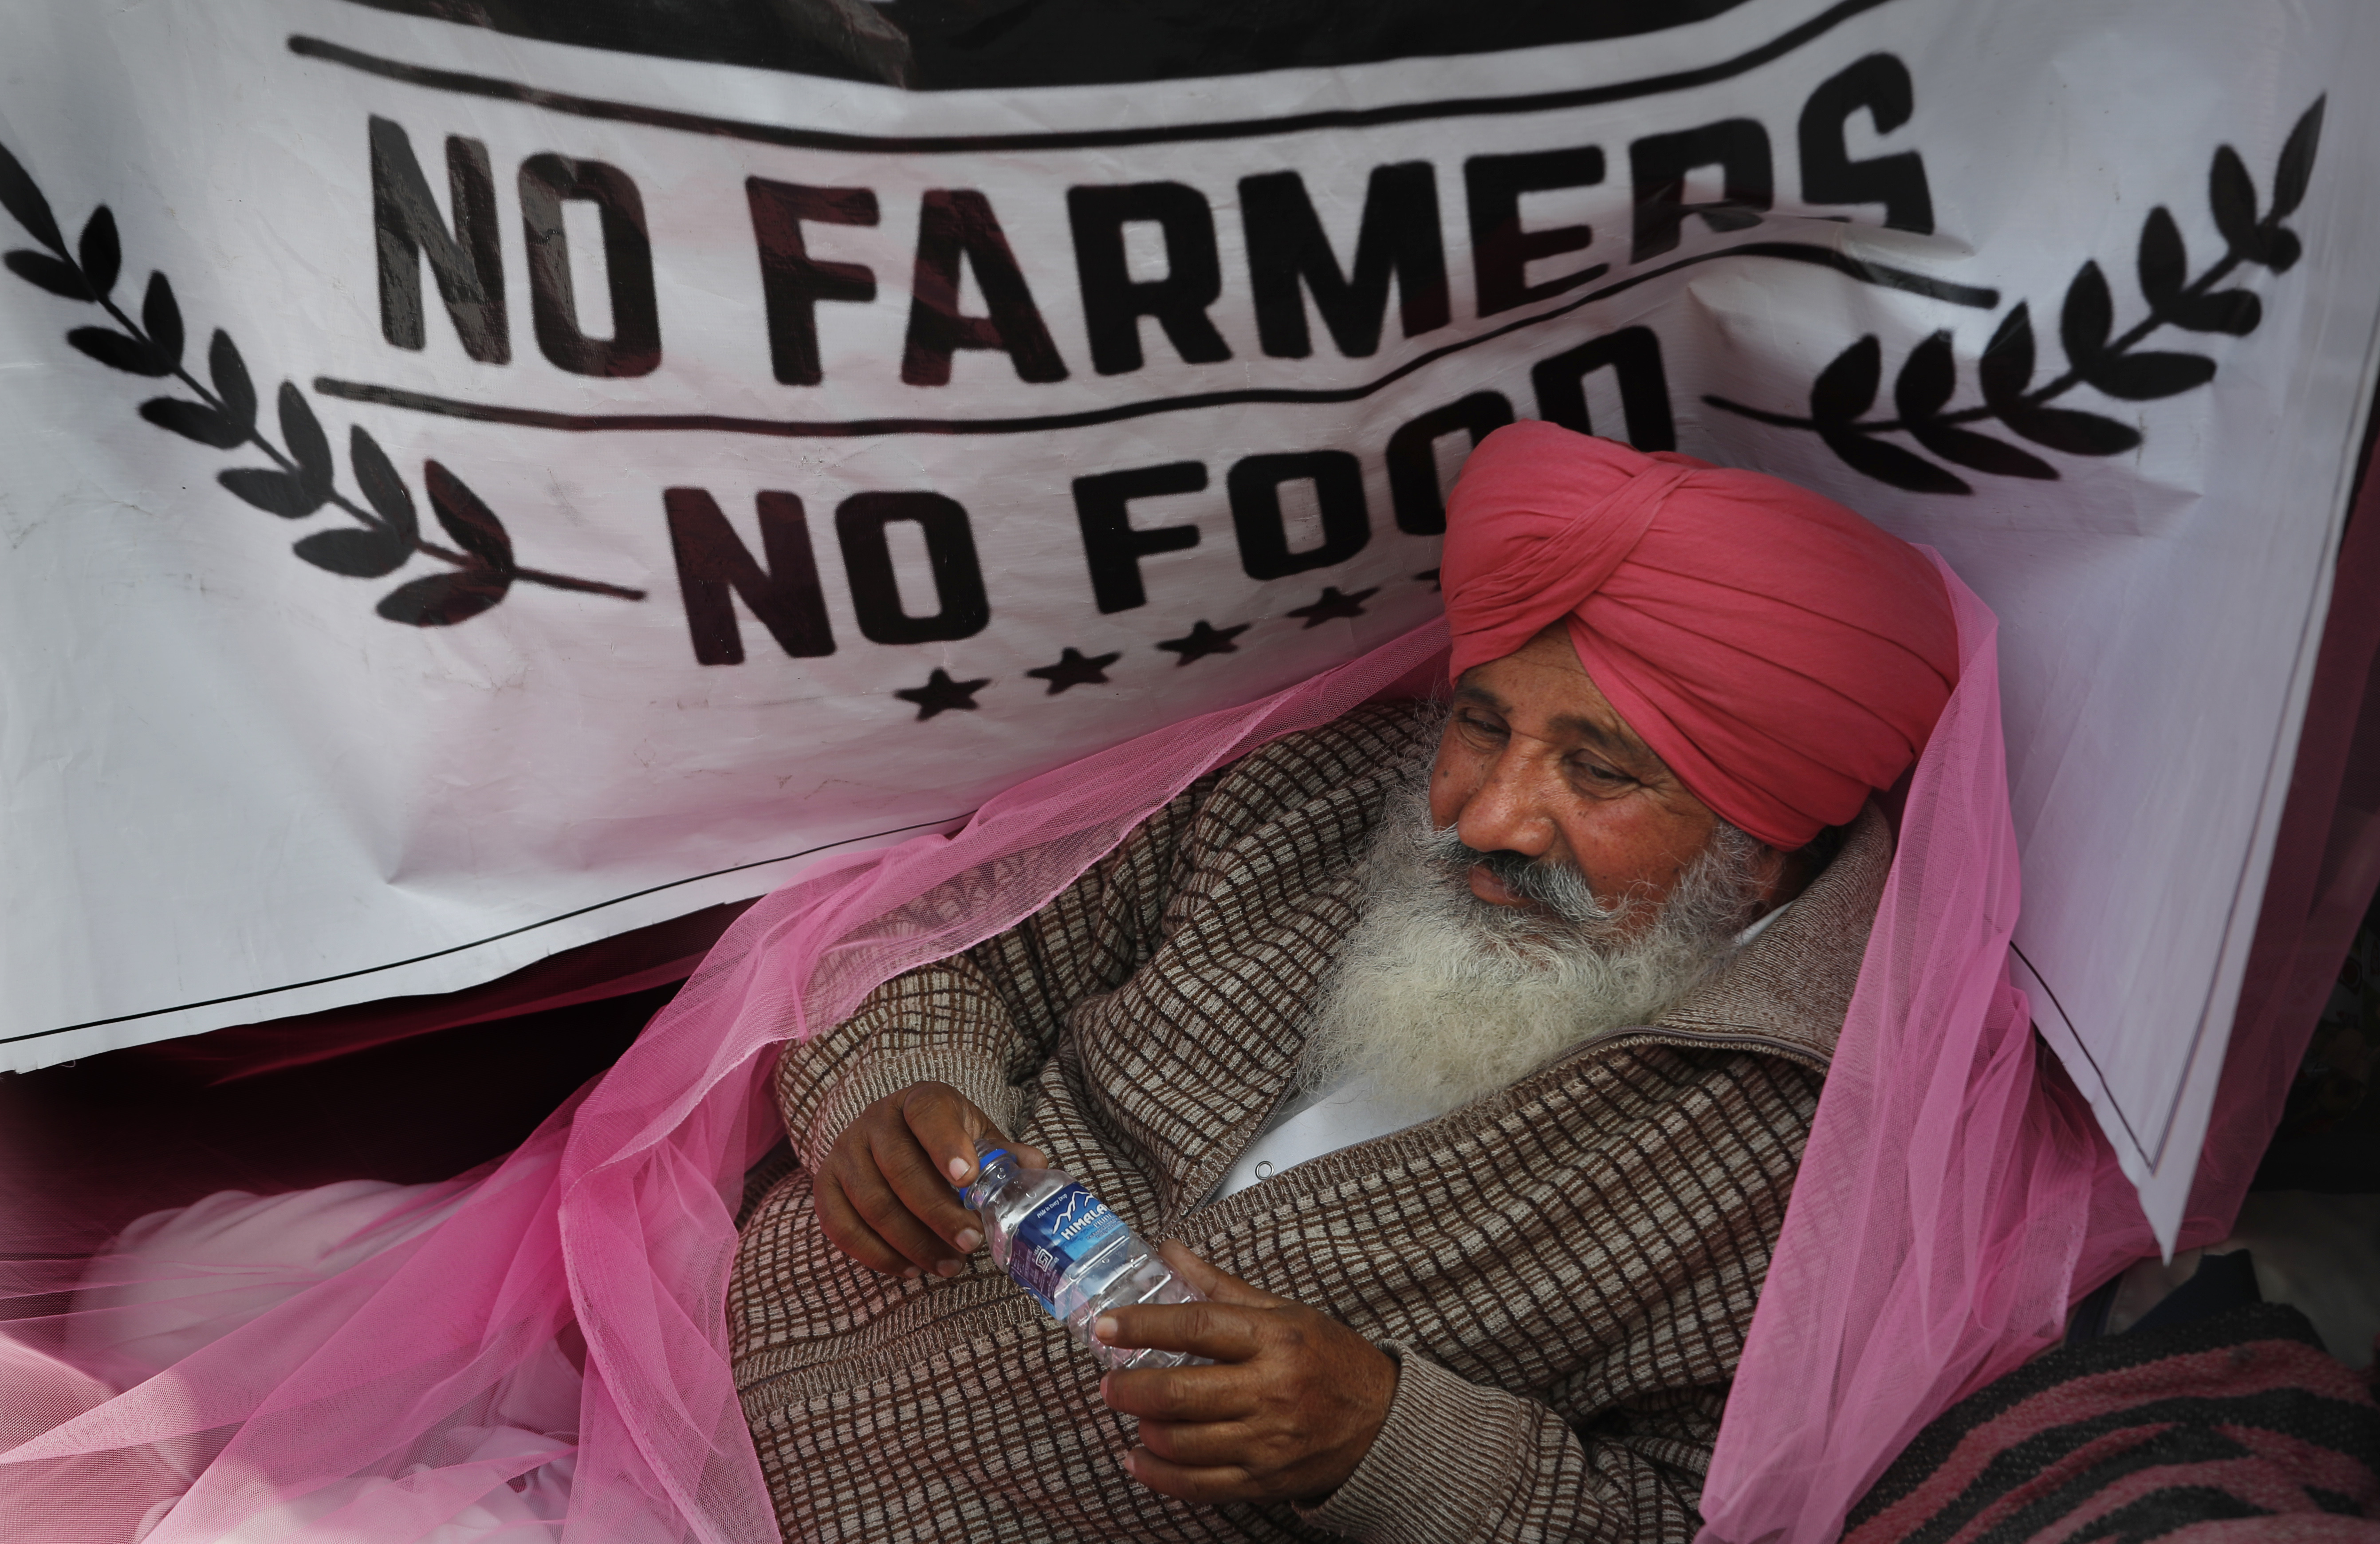 FILE - In this Monday, Dec. 14, 2020, file photo, a protesting farmer rests on his tractor trailer blocking a highway with other farmers at the Delhi- Haryana border, on the outskirts of New Delhi, India. Relations between Twitter and Modi's government have gone downhill ever since a tweet by pop star Rihanna in February sparked widespread condemnation of Indian Prime Minister Narendra Modi’s handling of massive farmer protests near the capital. At the heart of the standoff is a sweeping internet law that puts digital platforms like Twitter and Facebook under direct government oversight. Critics of the law worry it may lead to outright censorship in a country where digital freedoms have been shrinking since Modi took office in 2014. (AP Photo/Manish Swarup, File)